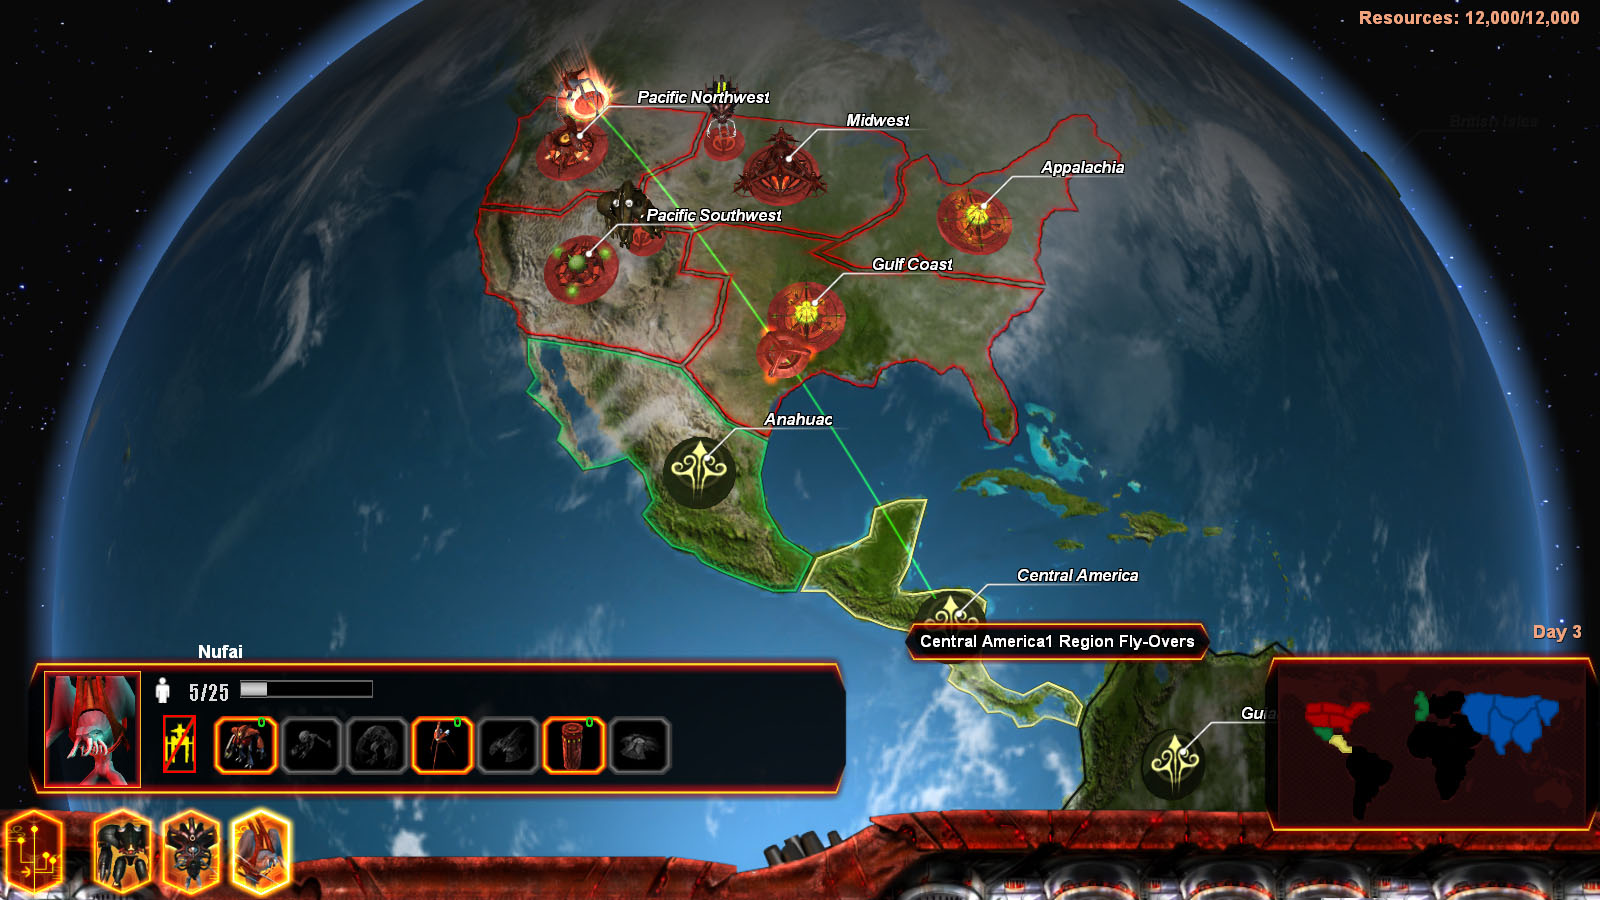 Universe-at-War-Earth-Assault-Game-PC-Version